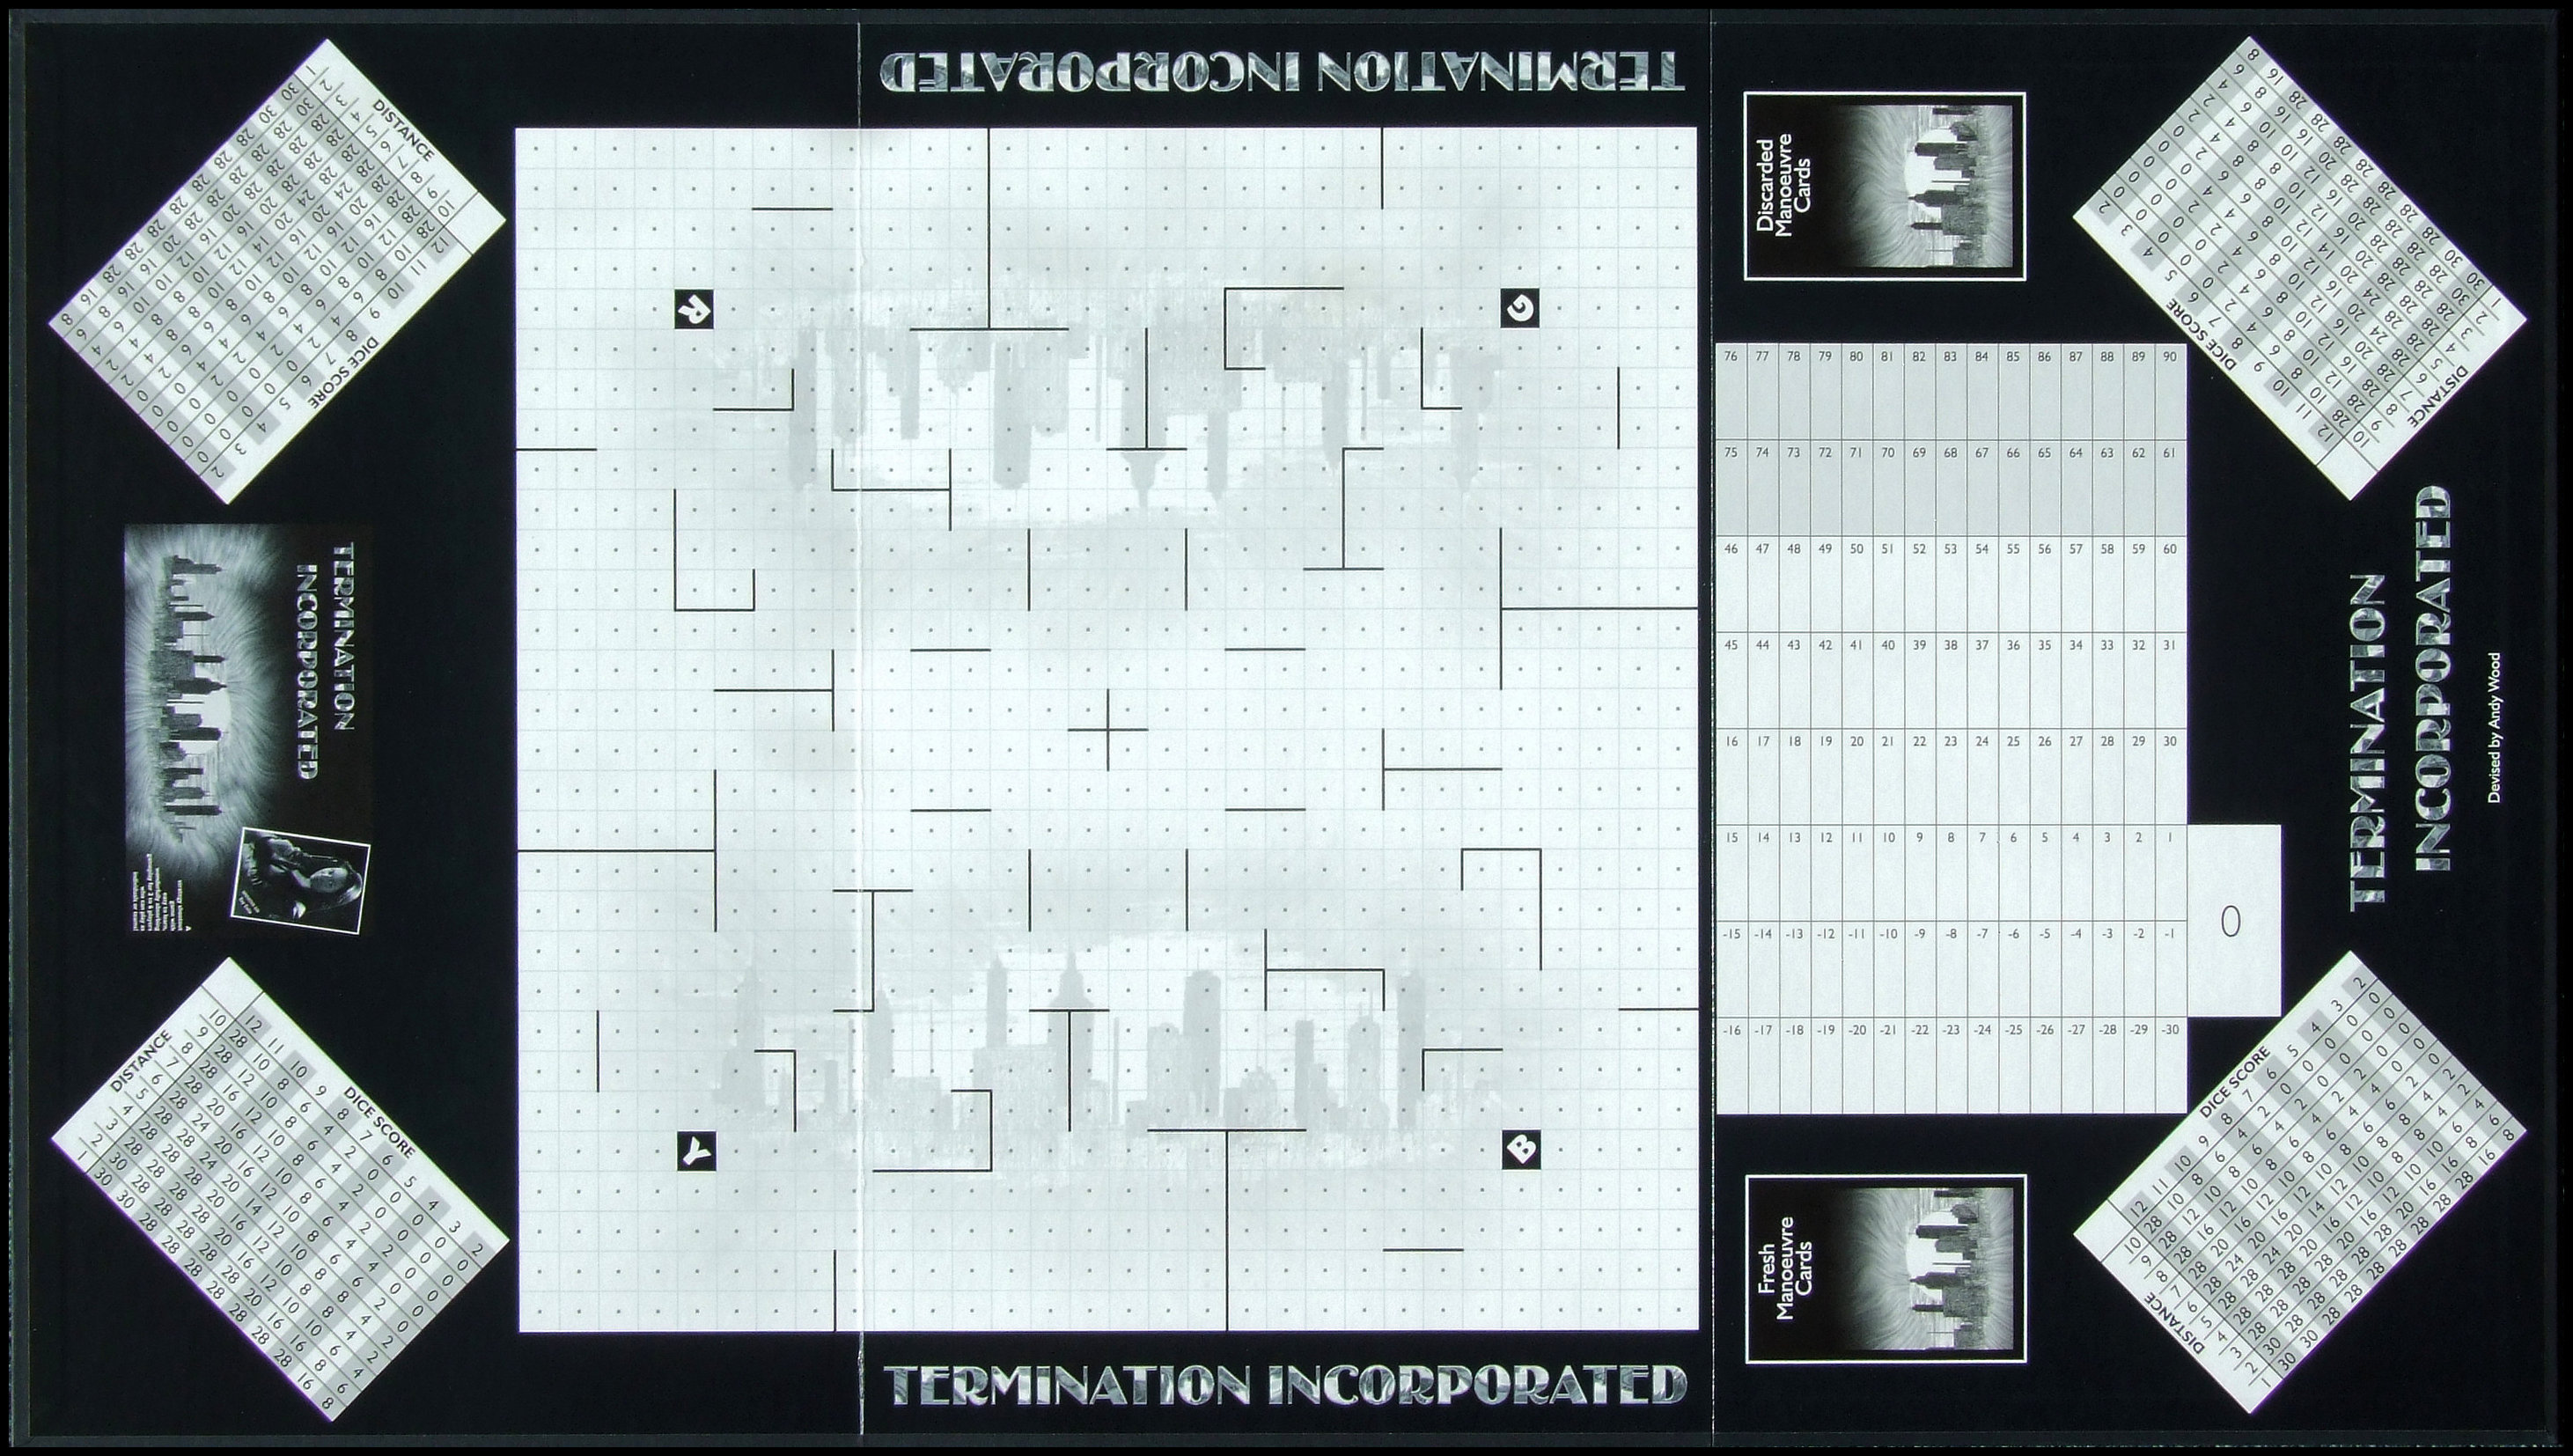 Termination Incorporated - The Game Board